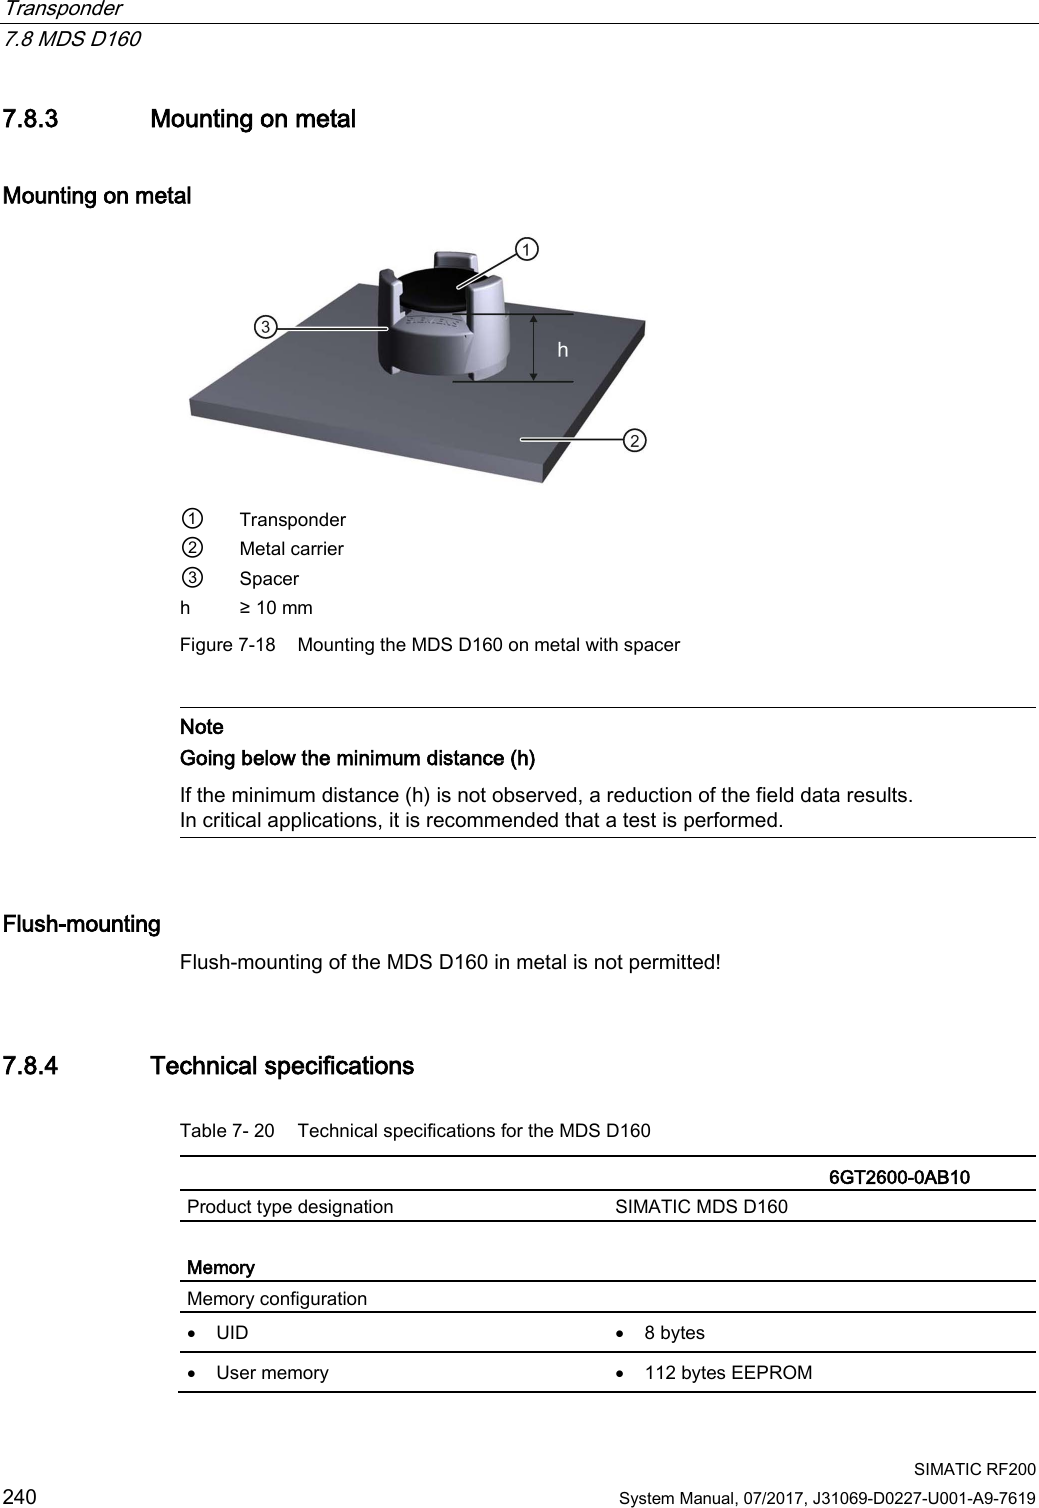 Transponder   7.8 MDS D160  SIMATIC RF200 240 System Manual, 07/2017, J31069-D0227-U001-A9-7619 7.8.3 Mounting on metal Mounting on metal  ① Transponder ② Metal carrier ③ Spacer h ≥ 10 mm Figure 7-18 Mounting the MDS D160 on metal with spacer   Note Going below the minimum distance (h) If the minimum distance (h) is not observed, a reduction of the field data results. In critical applications, it is recommended that a test is performed.  Flush-mounting Flush-mounting of the MDS D160 in metal is not permitted! 7.8.4 Technical specifications Table 7- 20 Technical specifications for the MDS D160    6GT2600-0AB10  Product type designation SIMATIC MDS D160  Memory Memory configuration  • UID • 8 bytes • User memory • 112 bytes EEPROM 